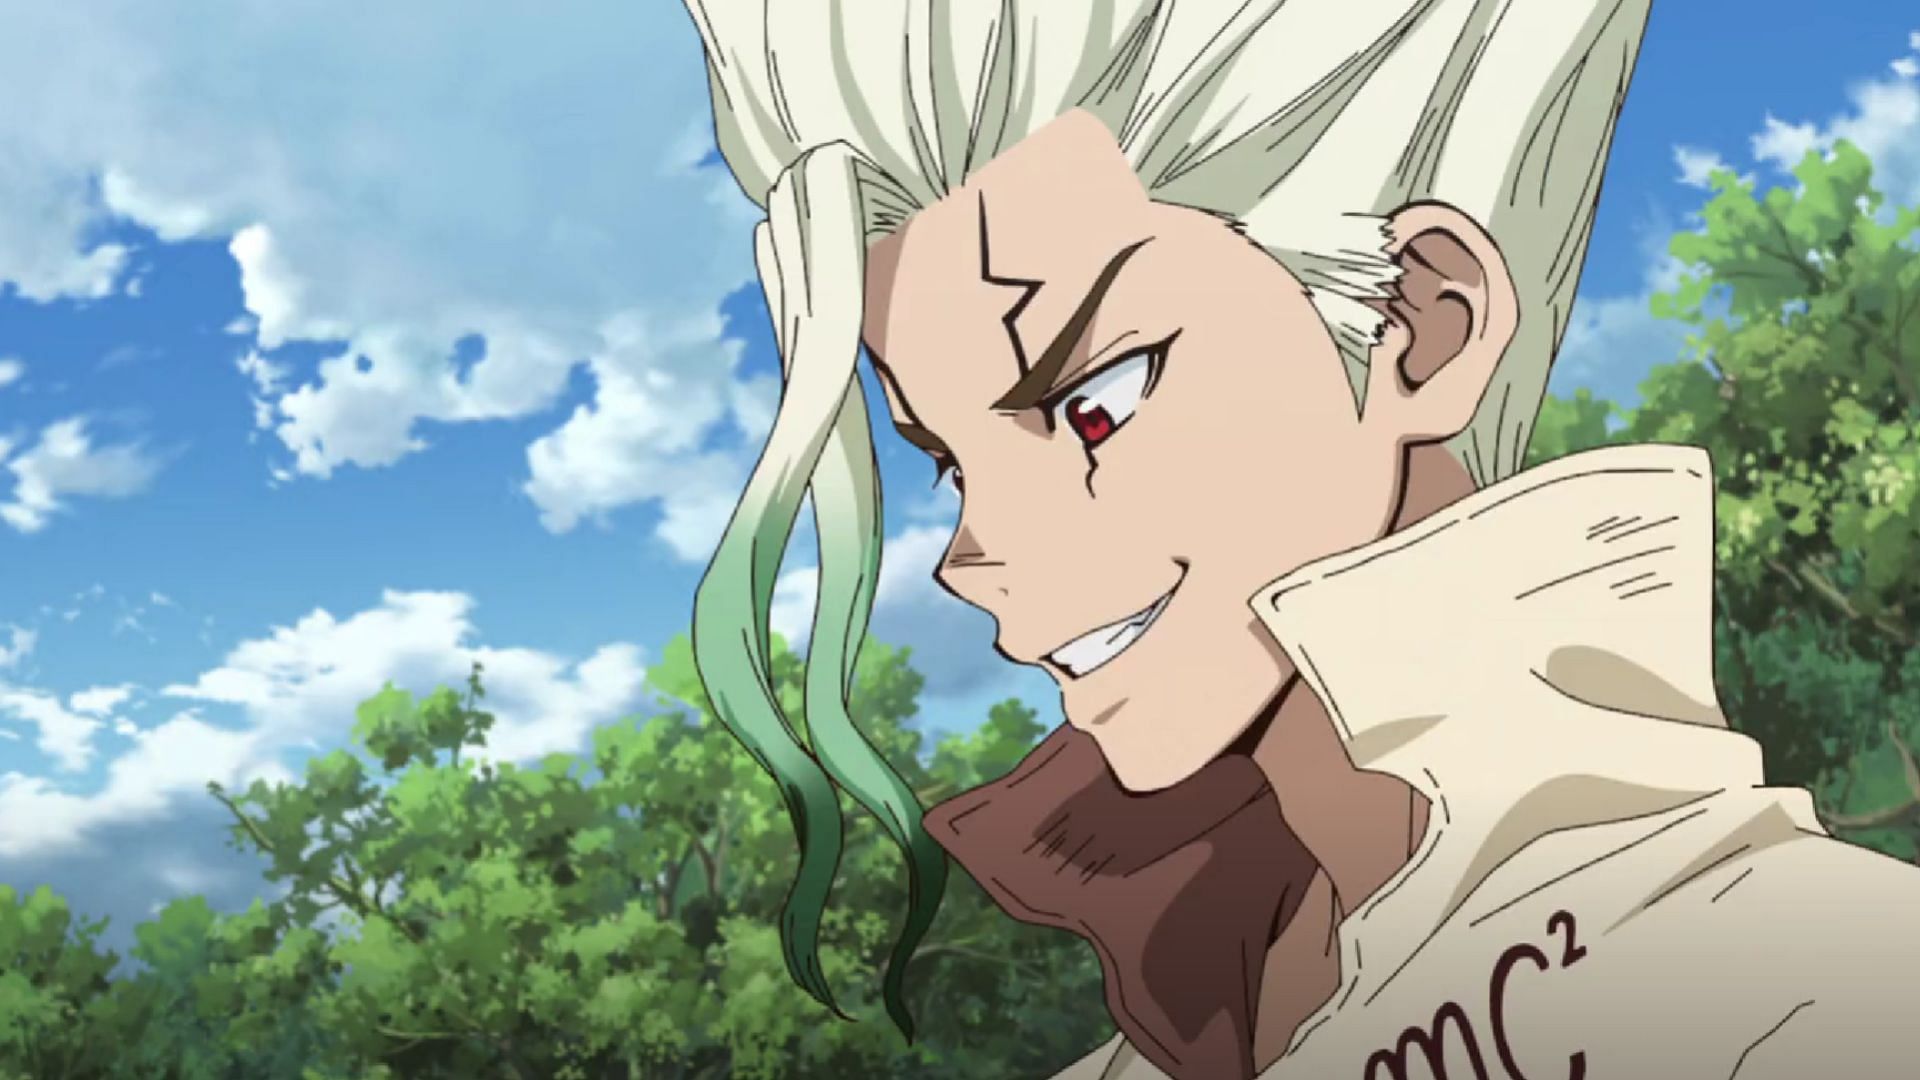 Dr. Stone: New World Episode 20 Review - I drink and watch anime